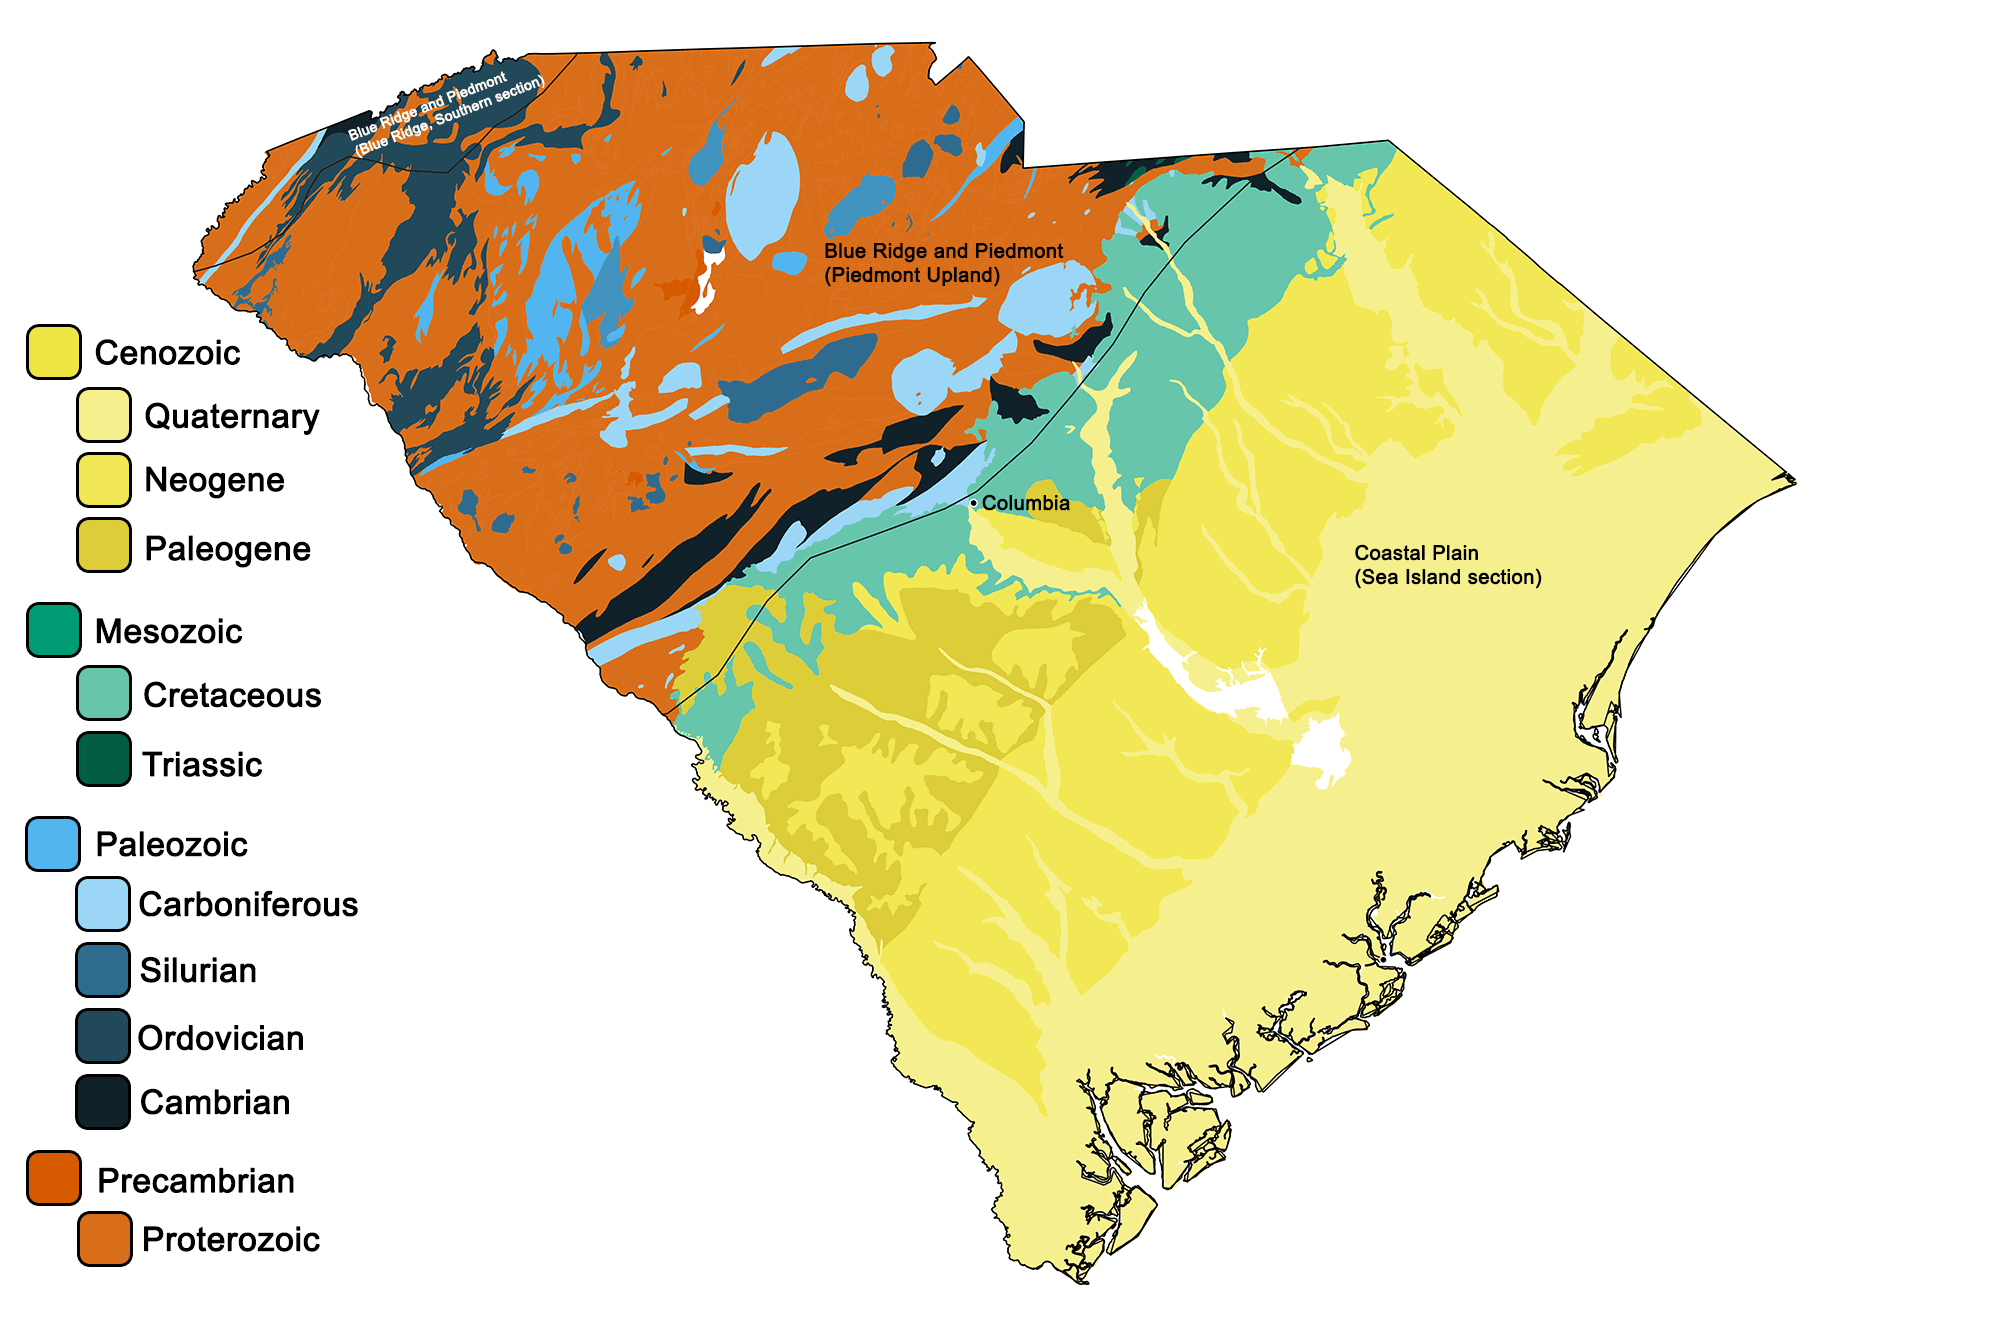 Geologic map of South Carolina, with physiographic regions identified.